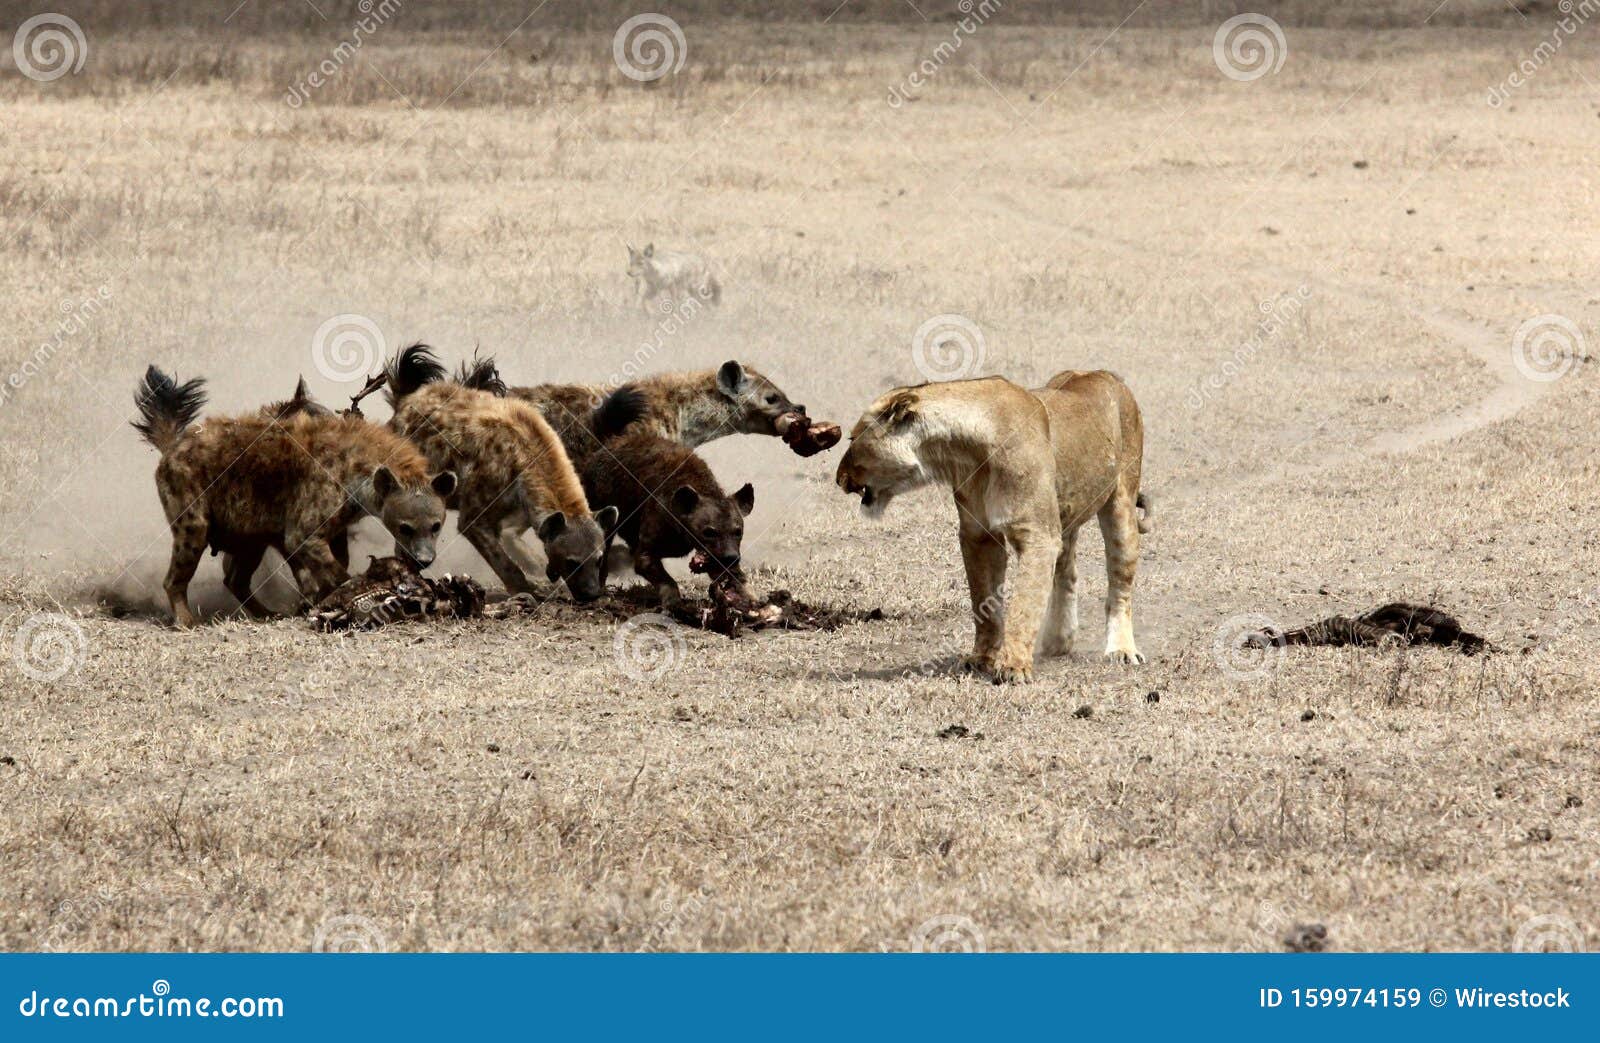 wide shot of a lion and hyenas in a field